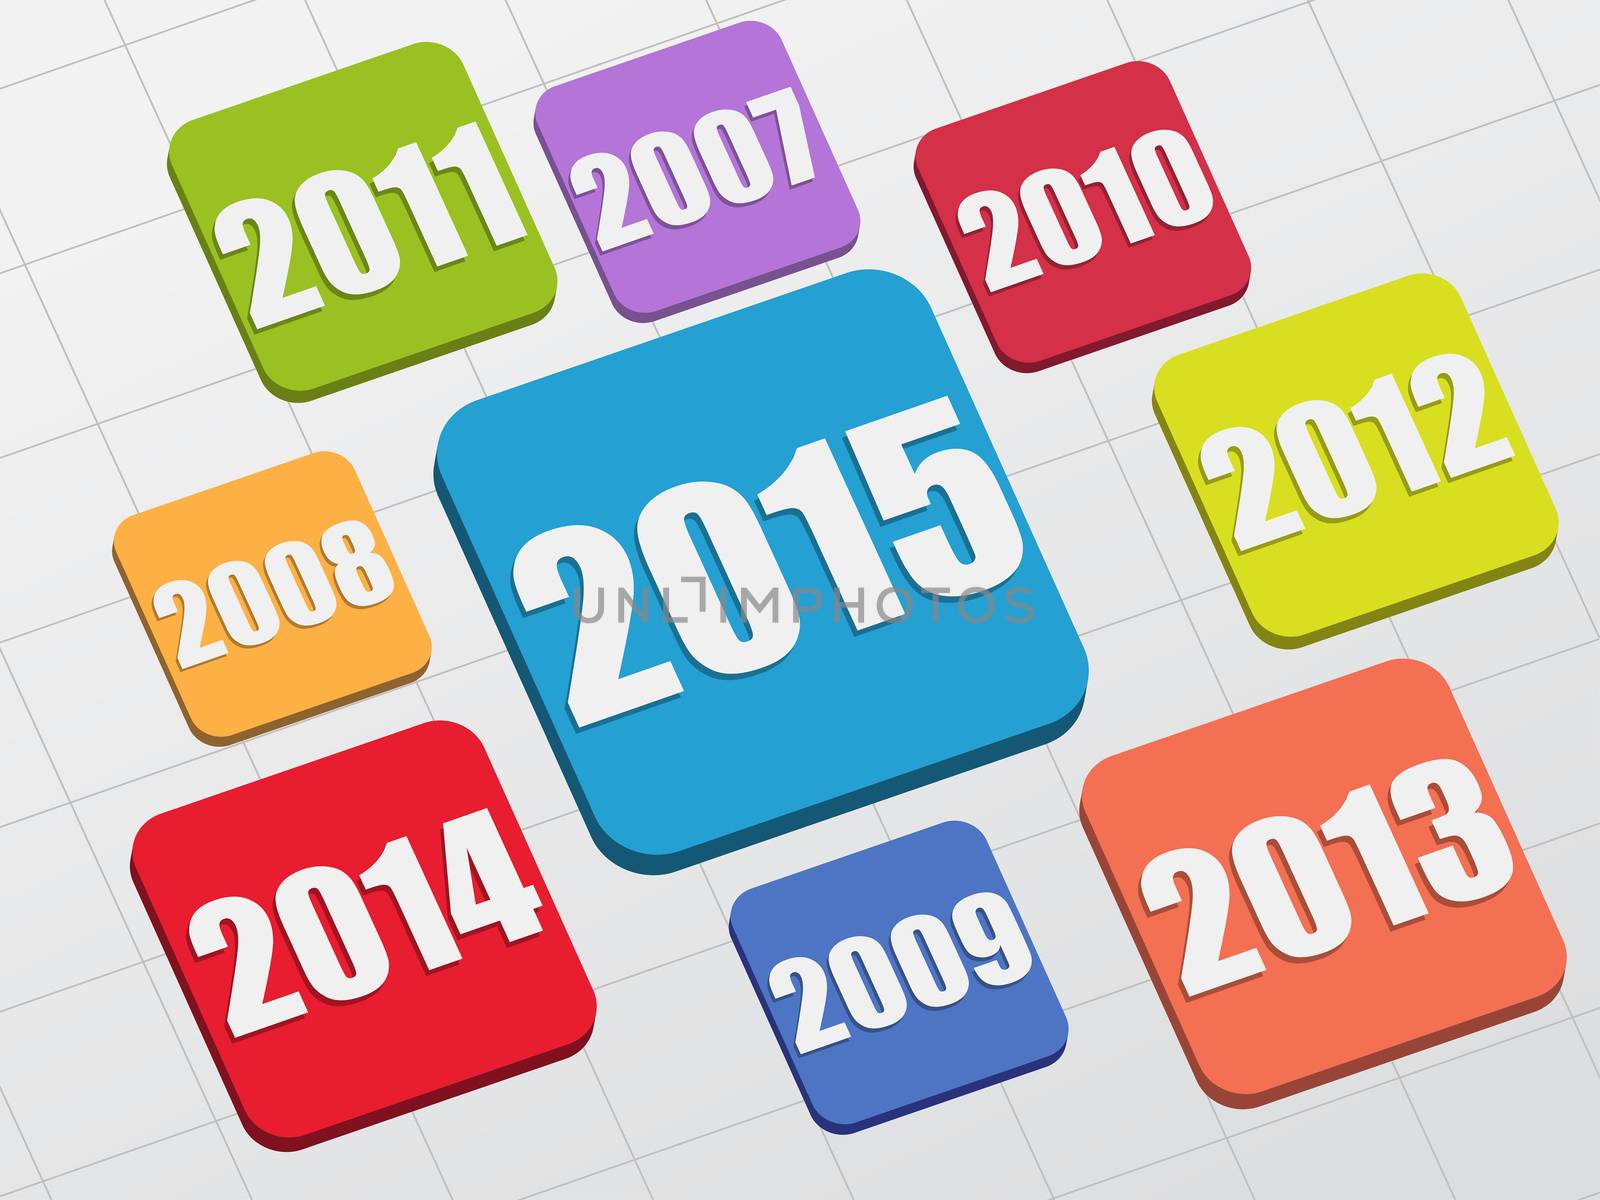 new year 2015 and previous years in 3d flat colored boxes, business concept